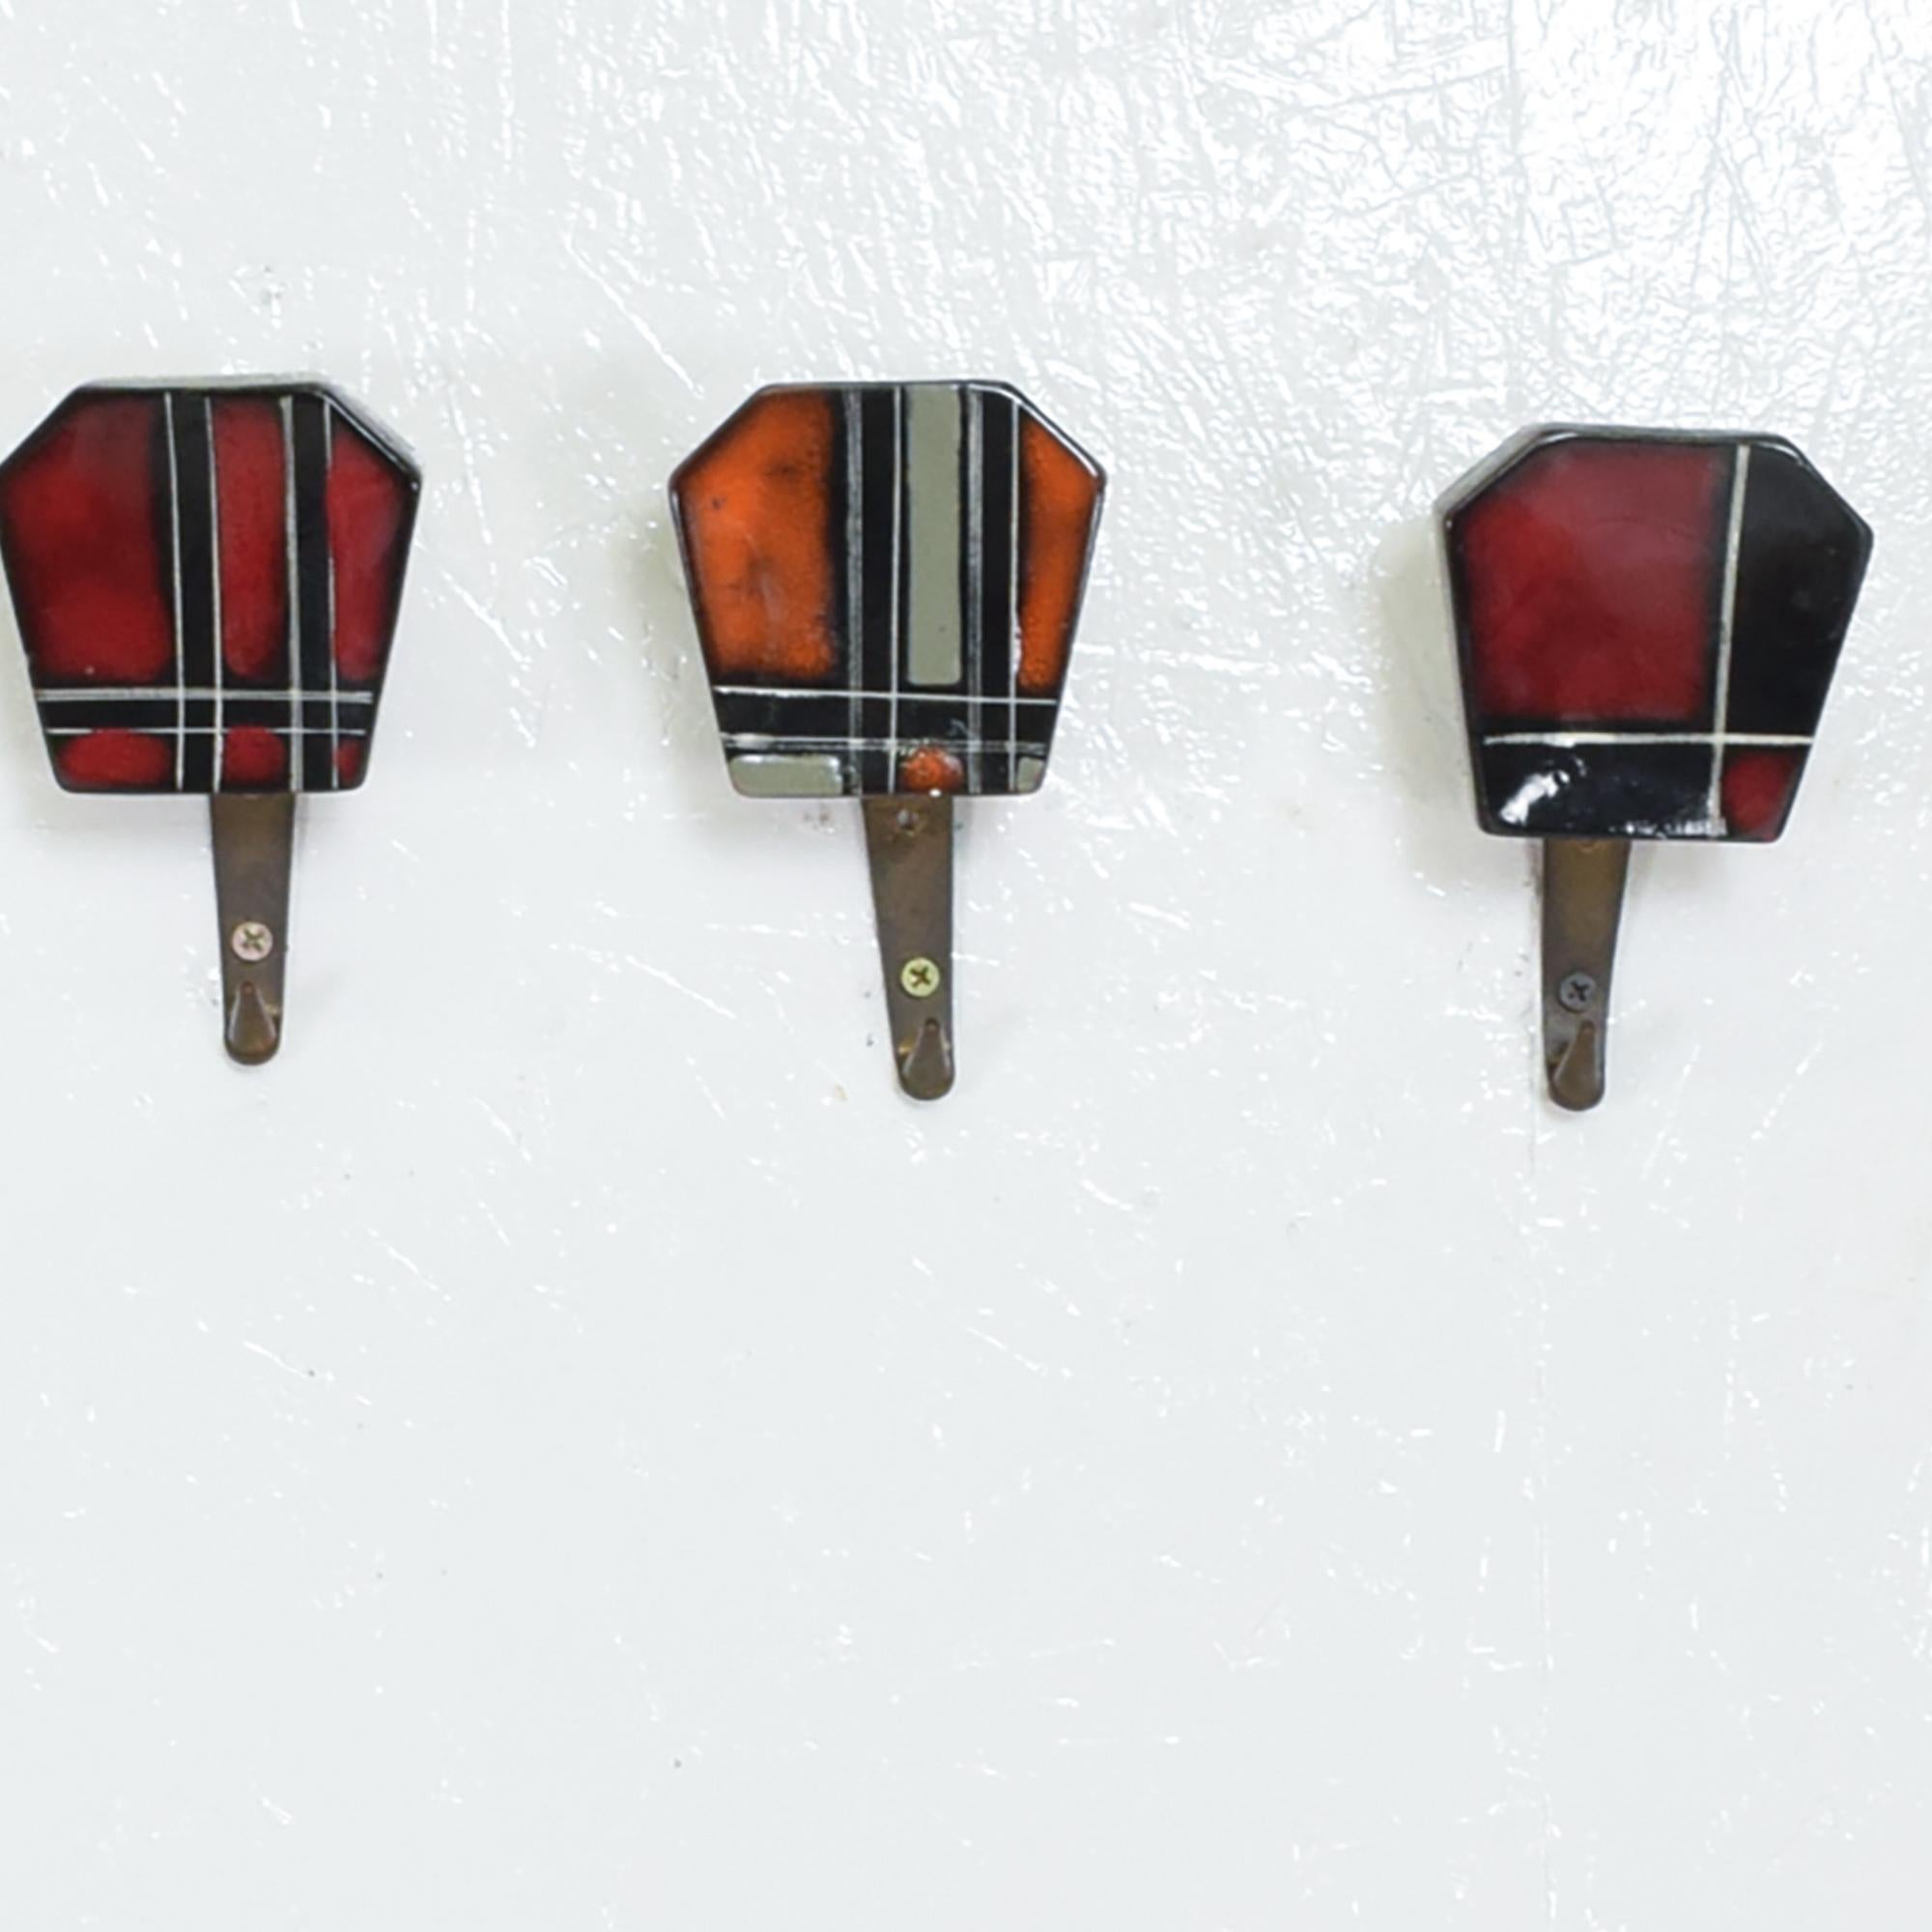 AMBIANIC presents
Midcentury Modern Set of three (3) Coat Hat Racks Hooks in Ceramic Iron Porcelain and Brass. Made in Germany 1950s
Pattern Plaid Tartan Red and Black.
Dimensions (each): 6 H x 3.5 W x 2.75 D. inches
Original unrestored vintage